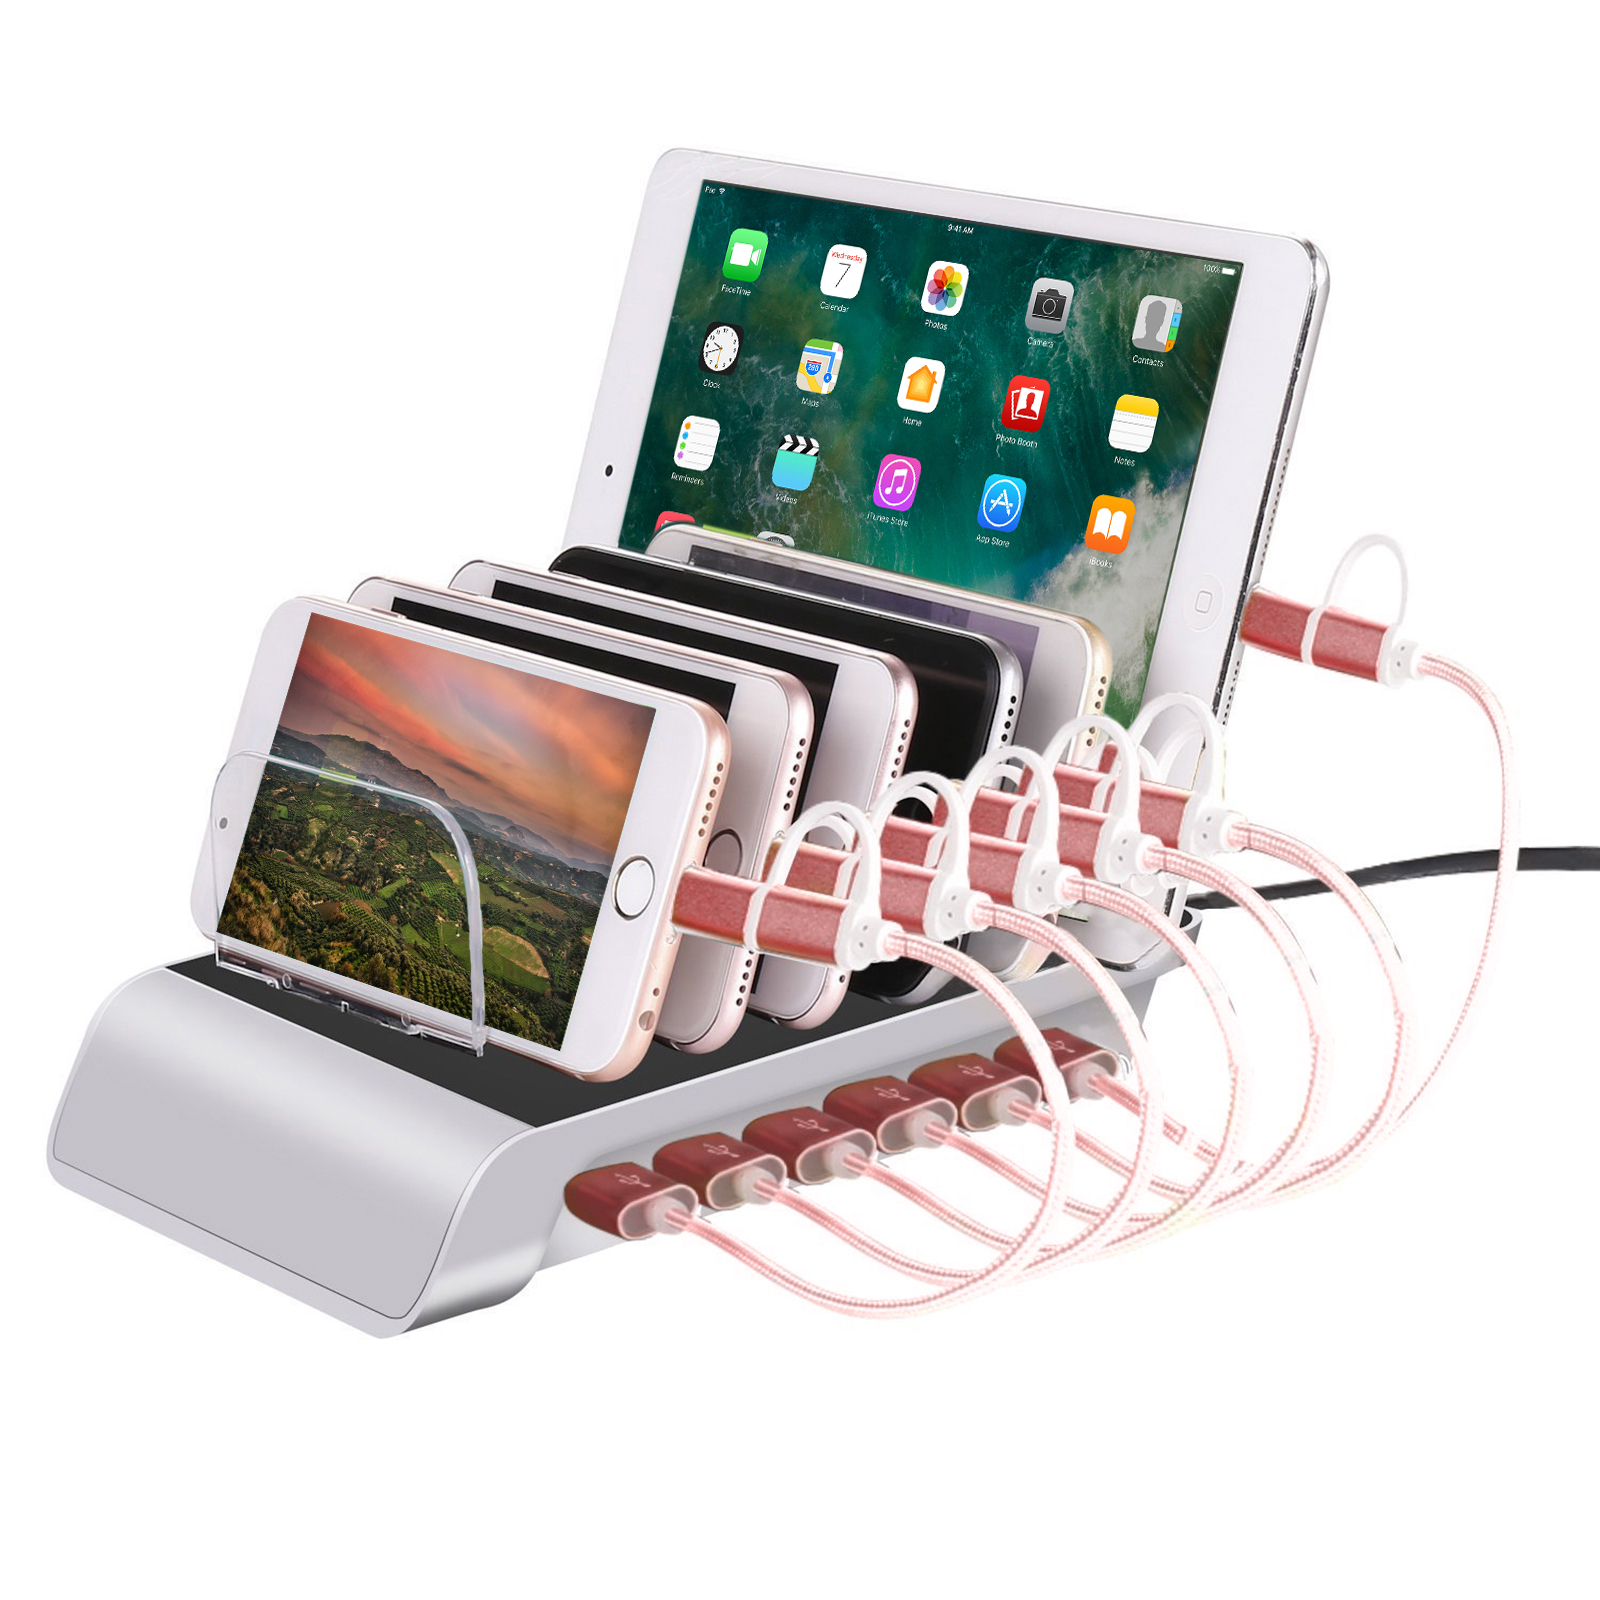 Chargers & Docking Stations